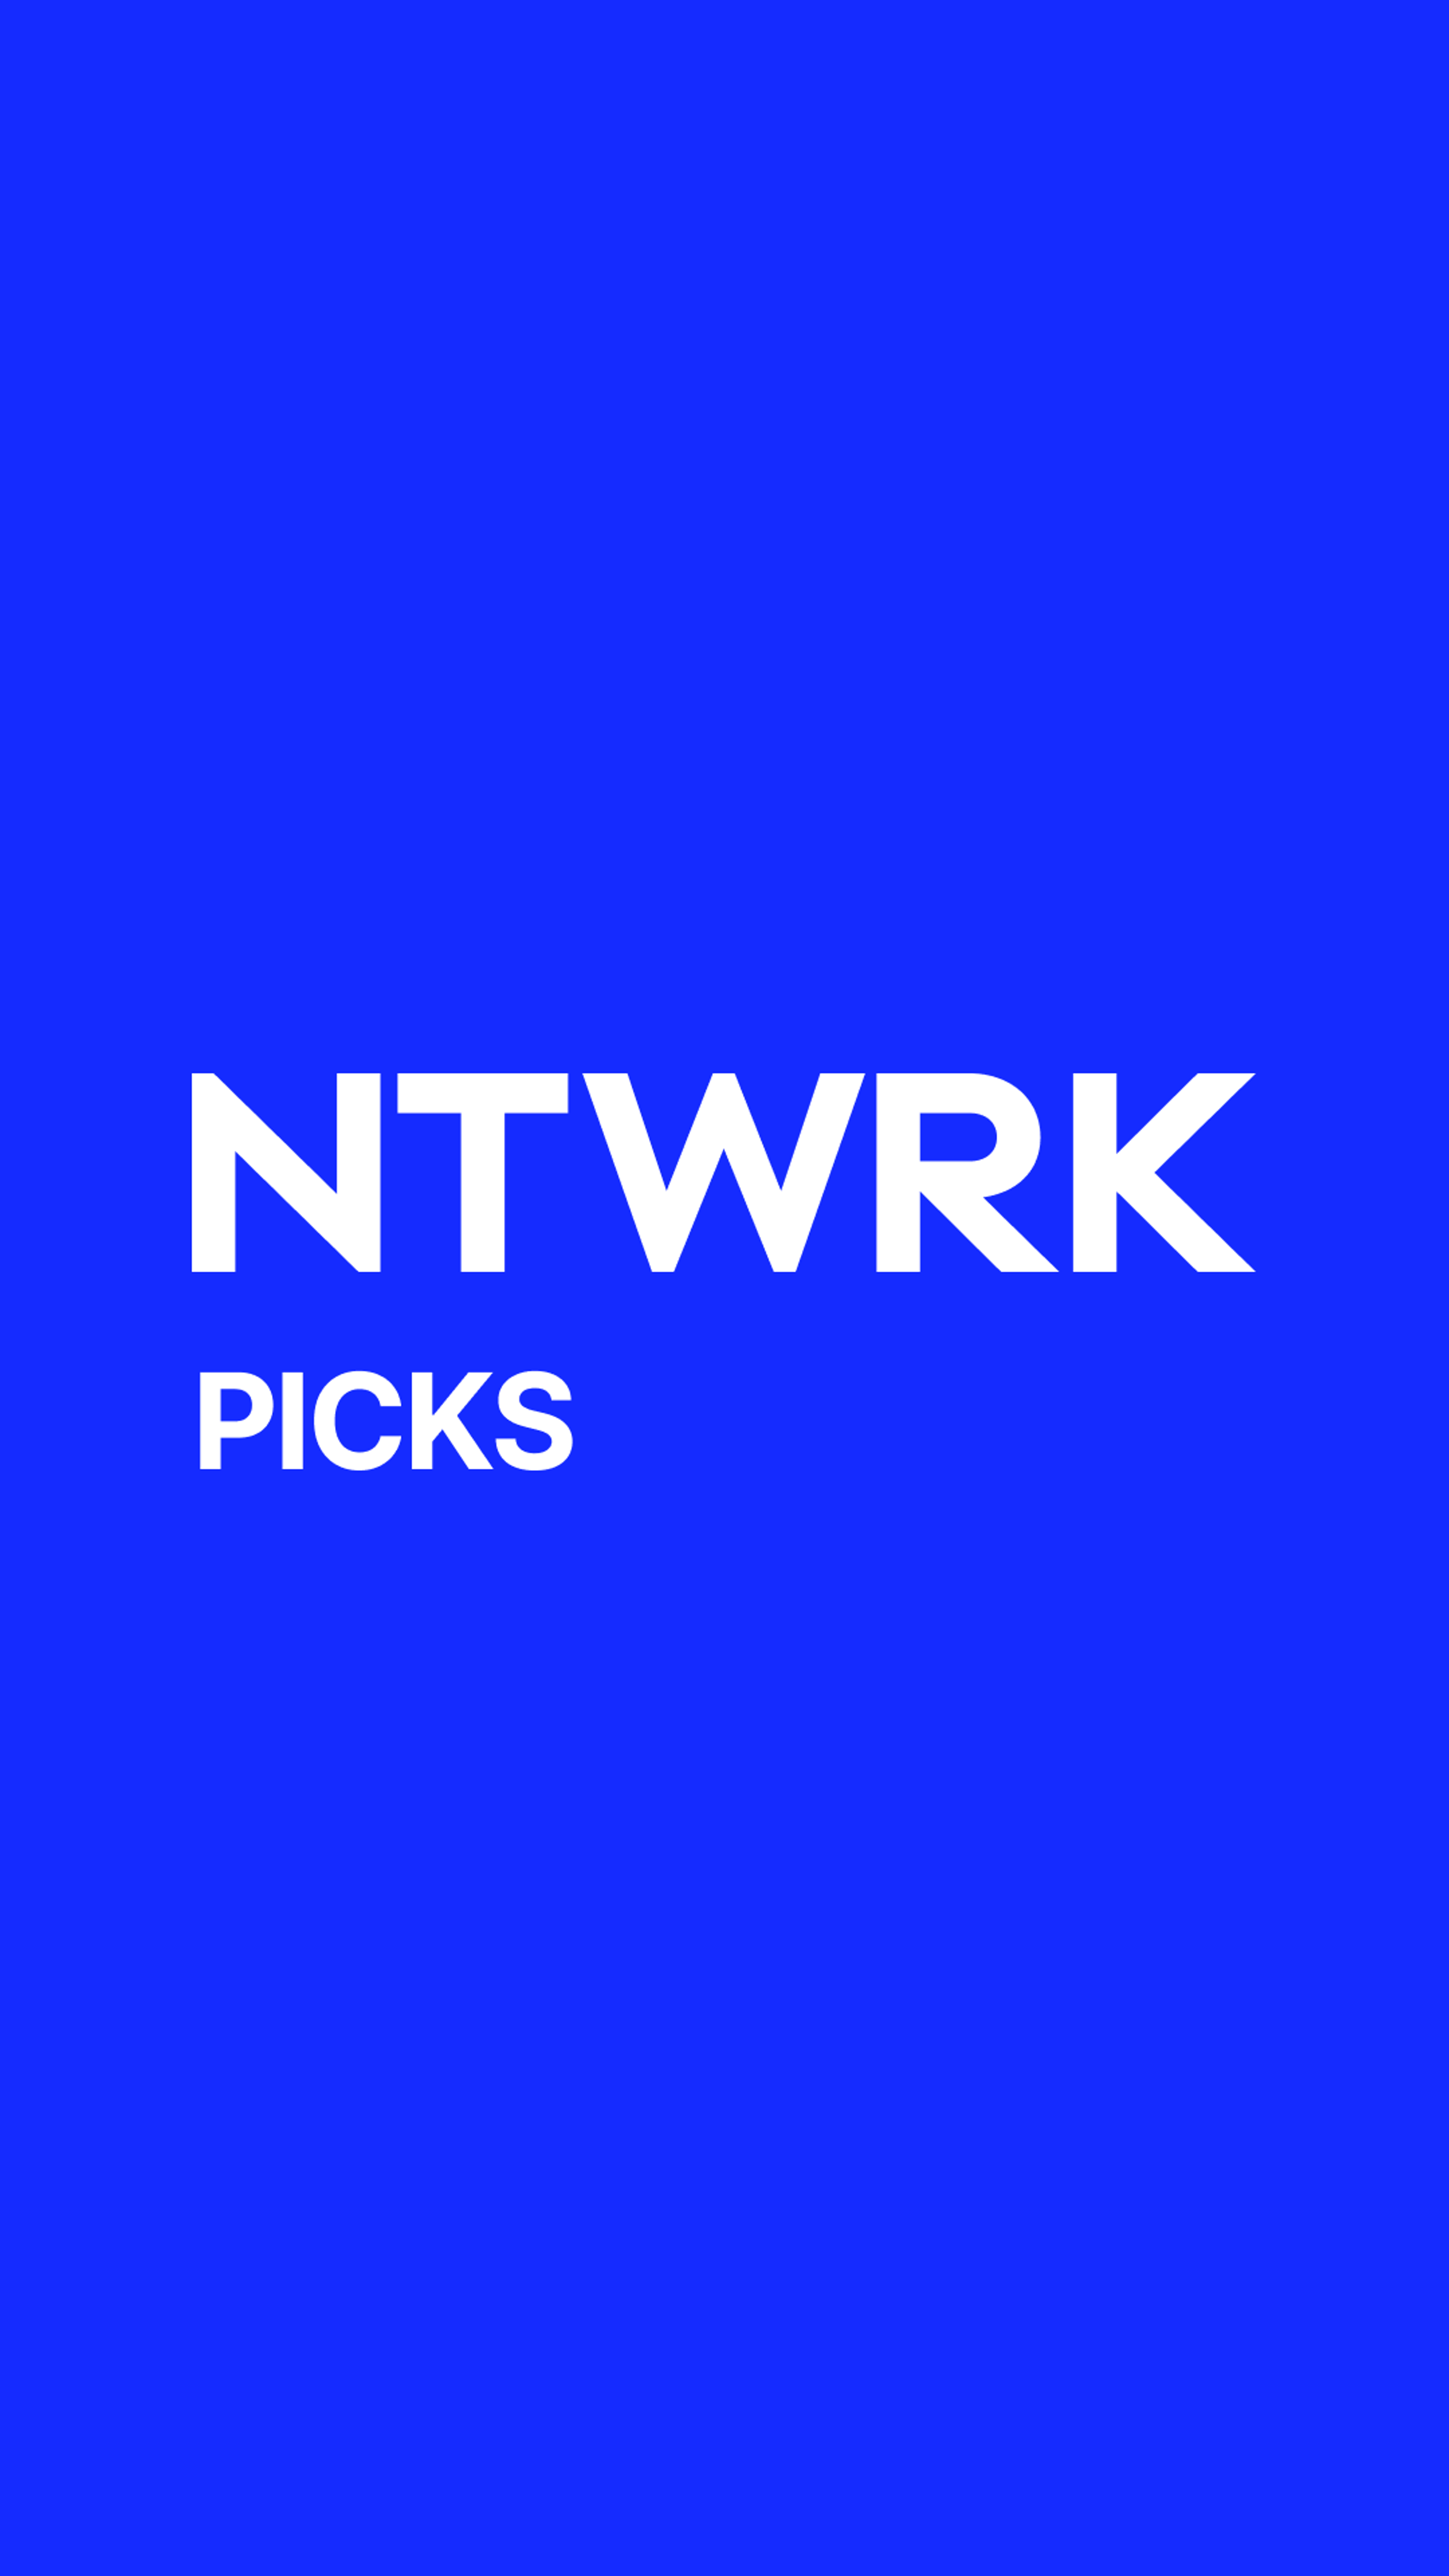 Preview image for the show titled "NTWRK Picks: Sp5der" at Today @ 7:00 PM